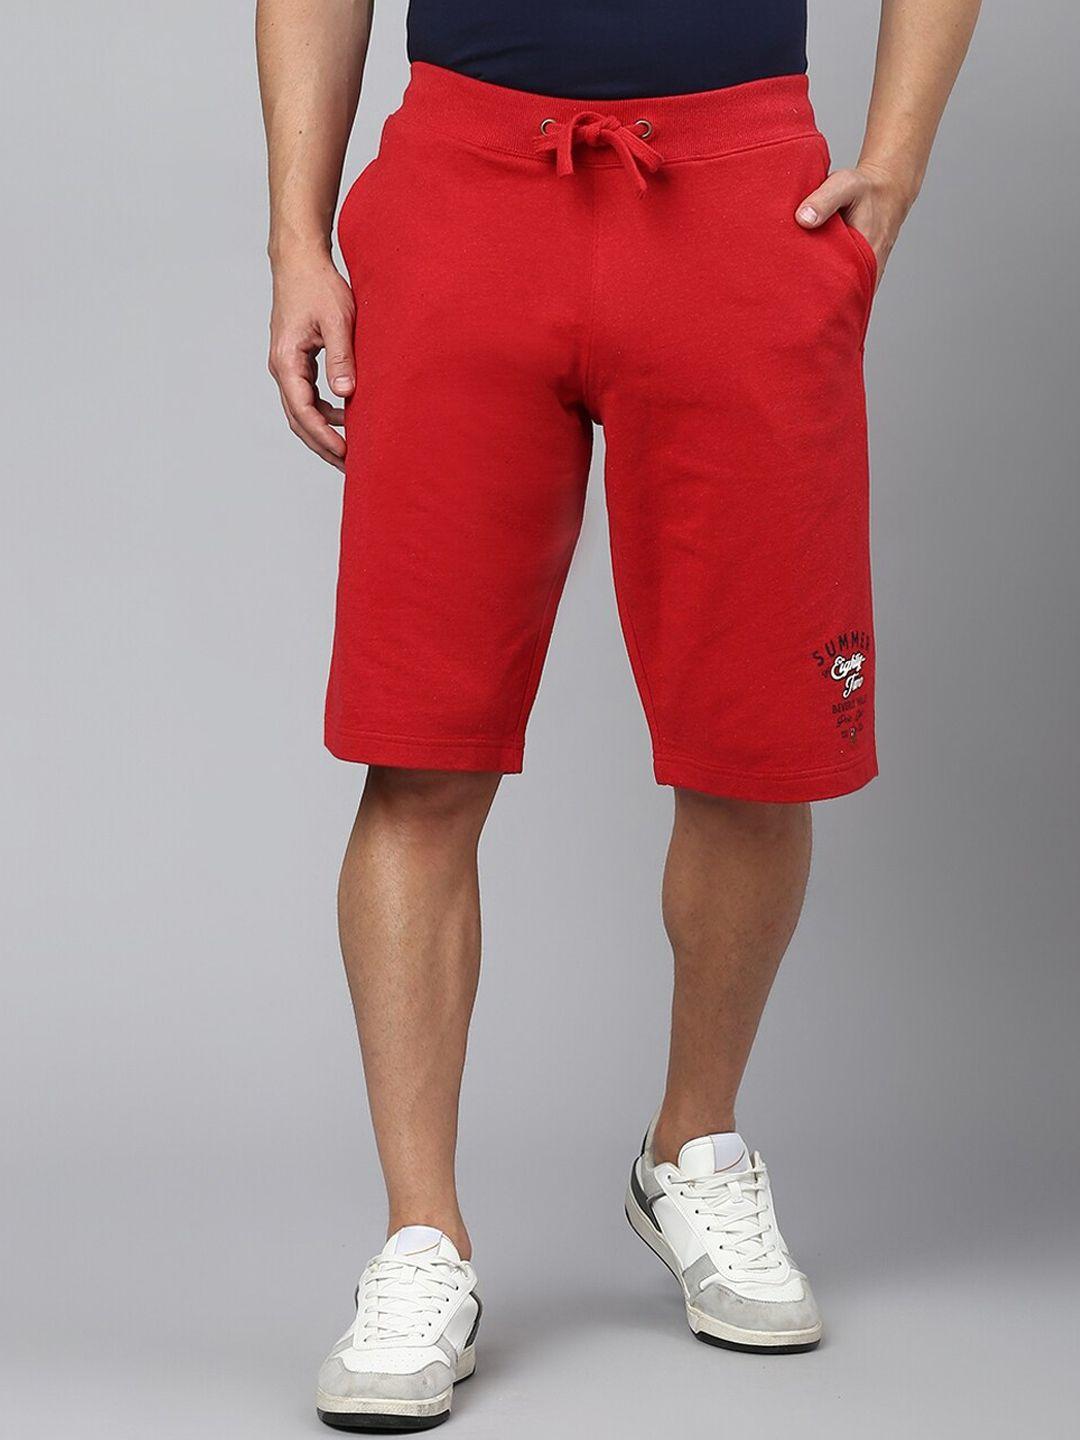 beverly-hills-polo-club-men-knee-length-pure-cotton-shorts